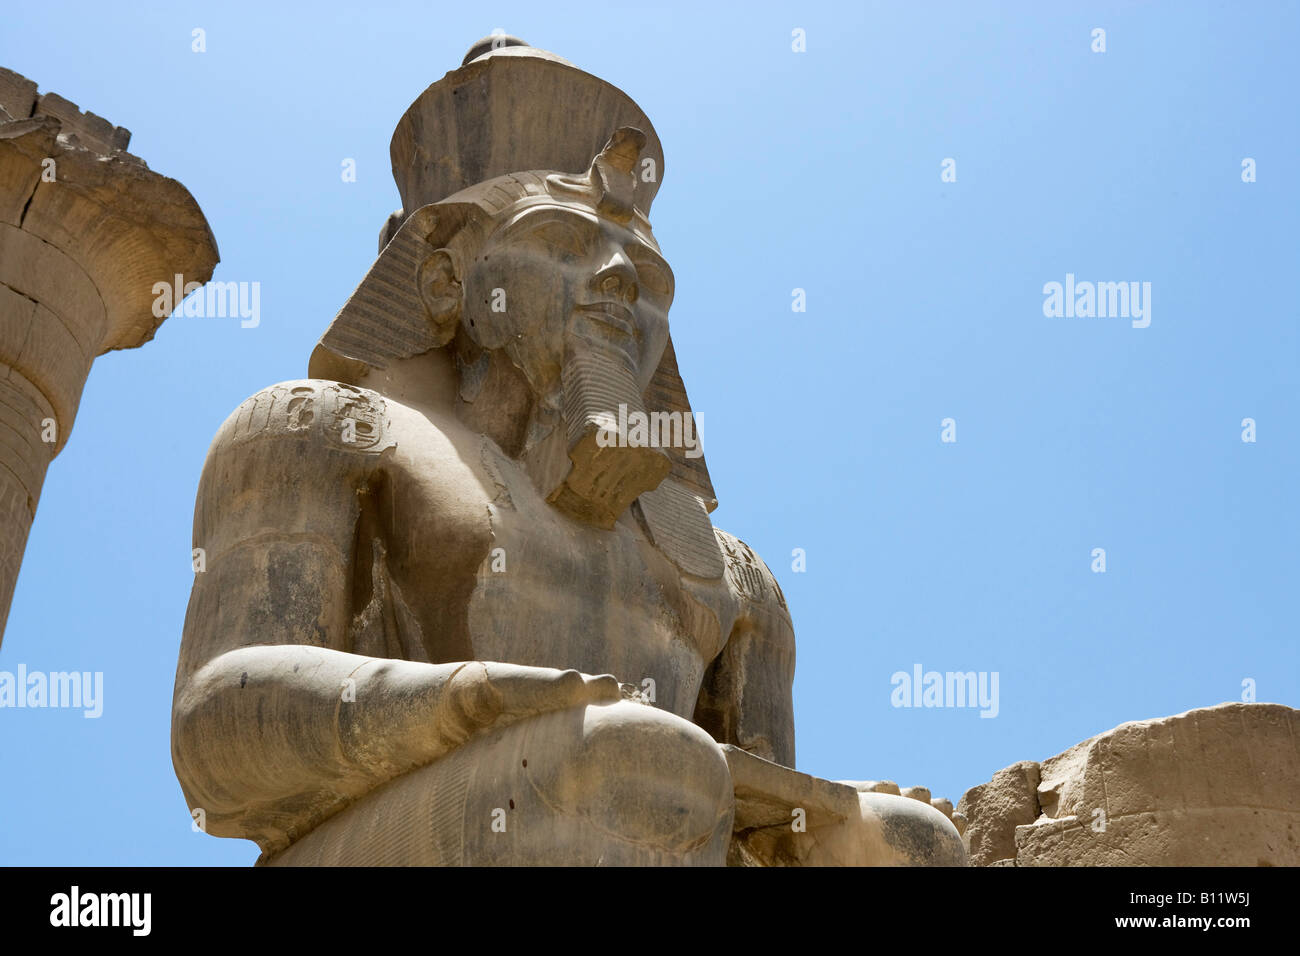 Seated Colossus of Ramses II in the Colonnade of Amenophis III, Luxor Temple, Luxor, Nile Valley, Egypt Stock Photo